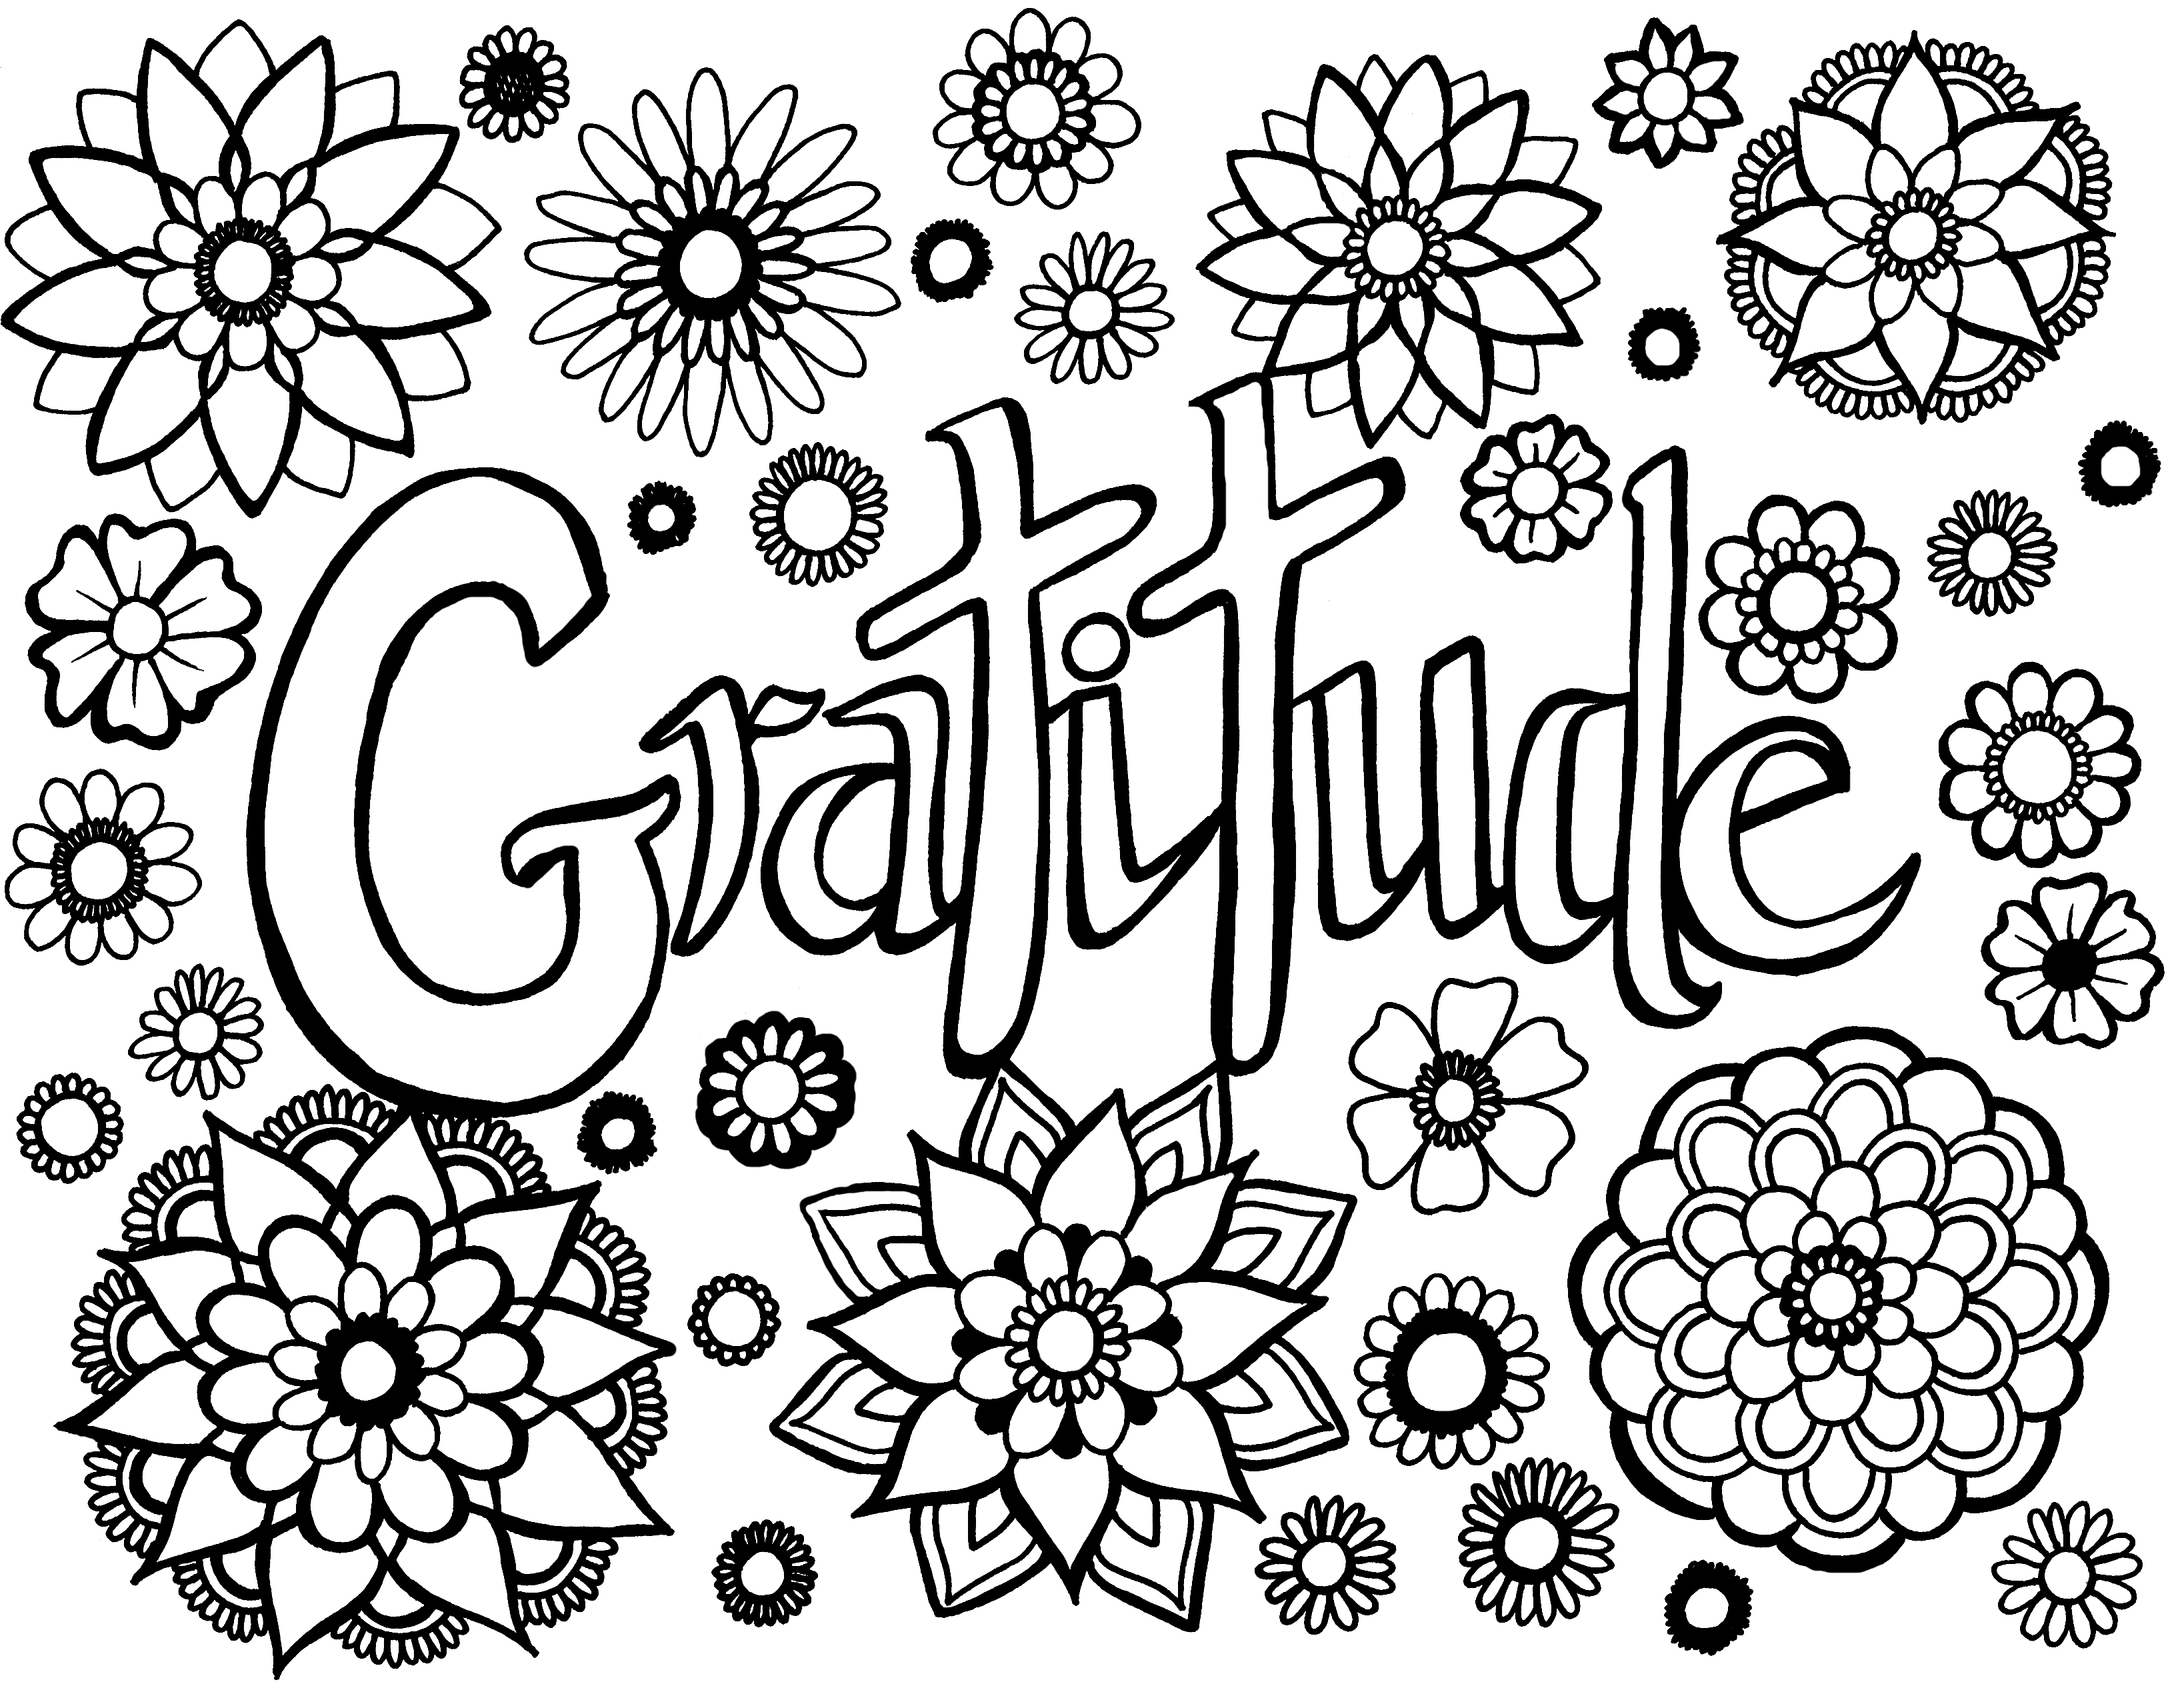 Coloring page with the word 'Gratitude' in bold, flowing script, surrounded by a variety of mandala-inspired flowers with intricate petals and patterns. The design invites a calming coloring experience, focusing on thankfulness and mindfulness, suitable for adults seeking a creative and reflective activity. Free coloring page :: YouColor